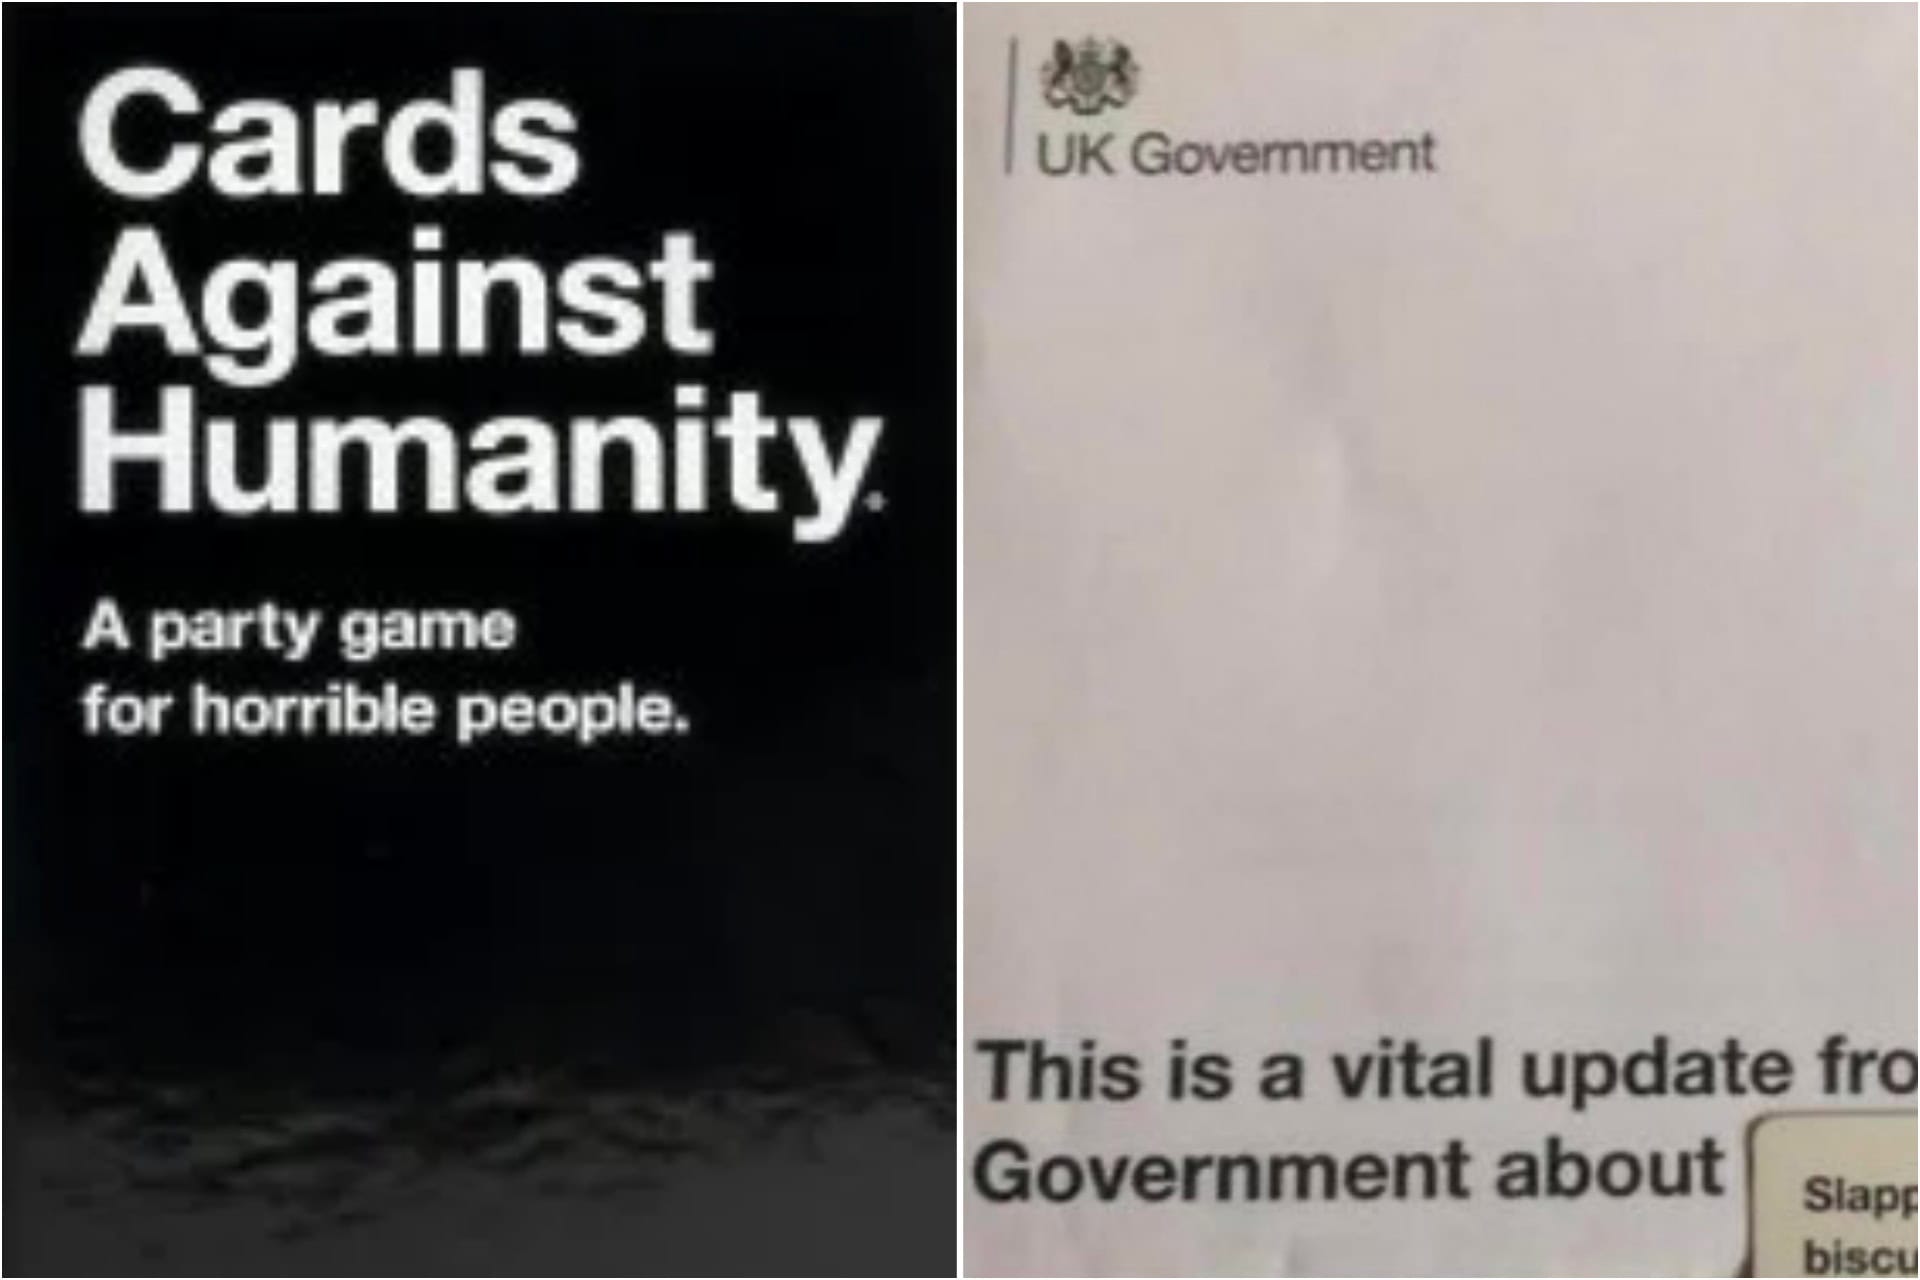 Govt uses same font as Cards Against Humanity in mailings and the results are disgraceful